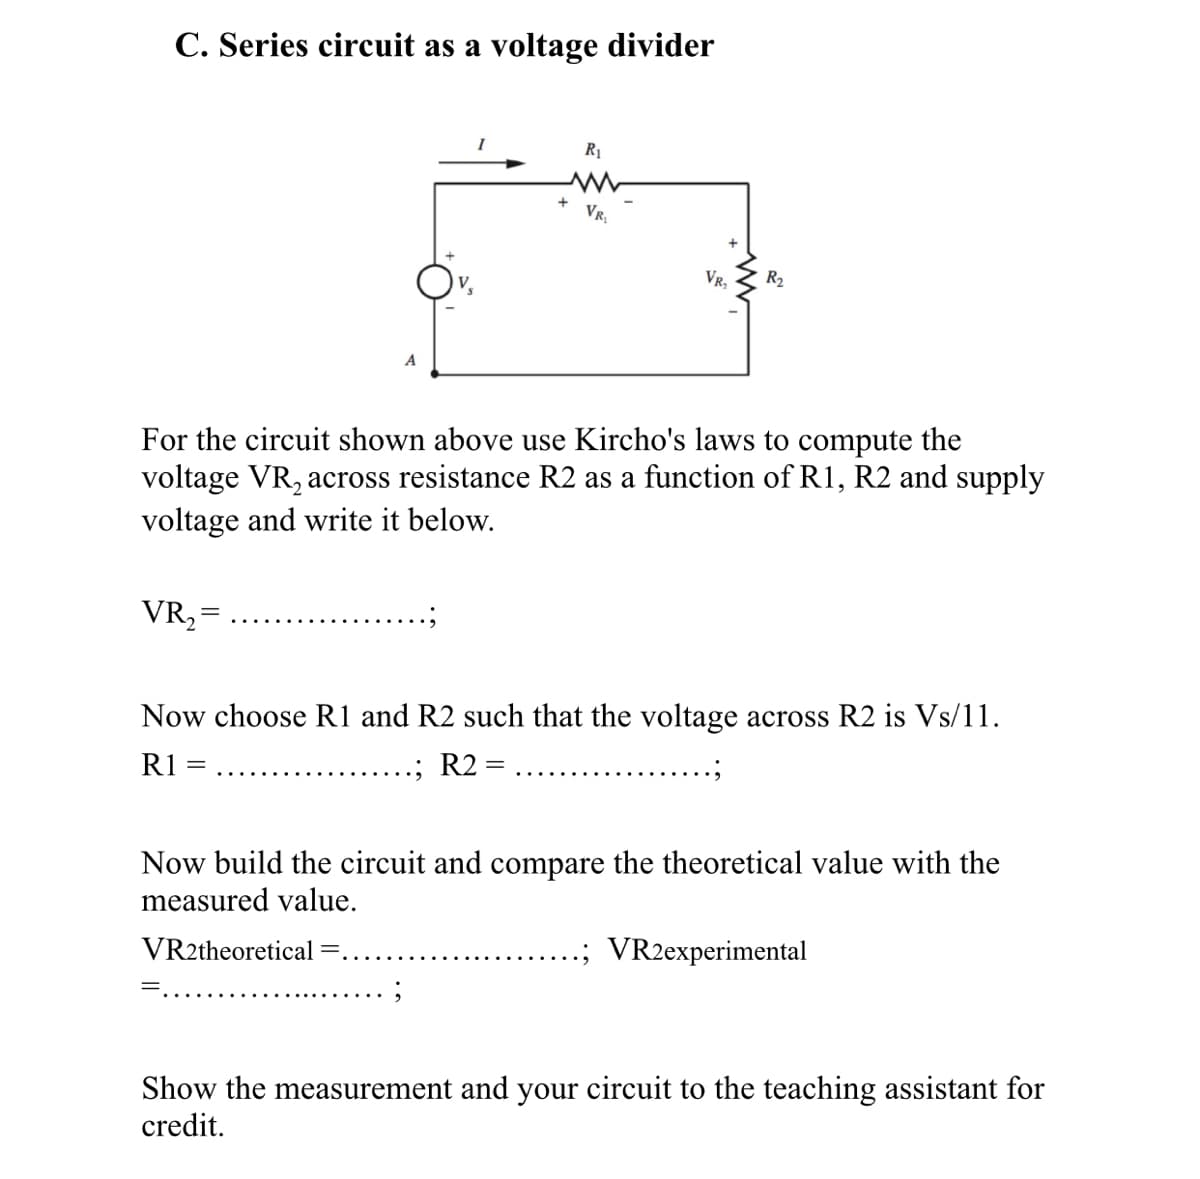 C. Series circuit as a voltage divider
R1
VR,
VR,
R2
V,
For the circuit shown above use Kircho's laws to compute the
voltage VR, across resistance R2 as a function ofR1, R2 and supply
voltage and write it below.
VR, =
Now choose R1 and R2 such that the voltage across R2 is Vs/11.
R1
R2 =
Now build the circuit and compare the theoretical value with the
measured value.
VR2theoretical
VR2experimental
Show the measurement and your circuit to the teaching assistant for
credit.
